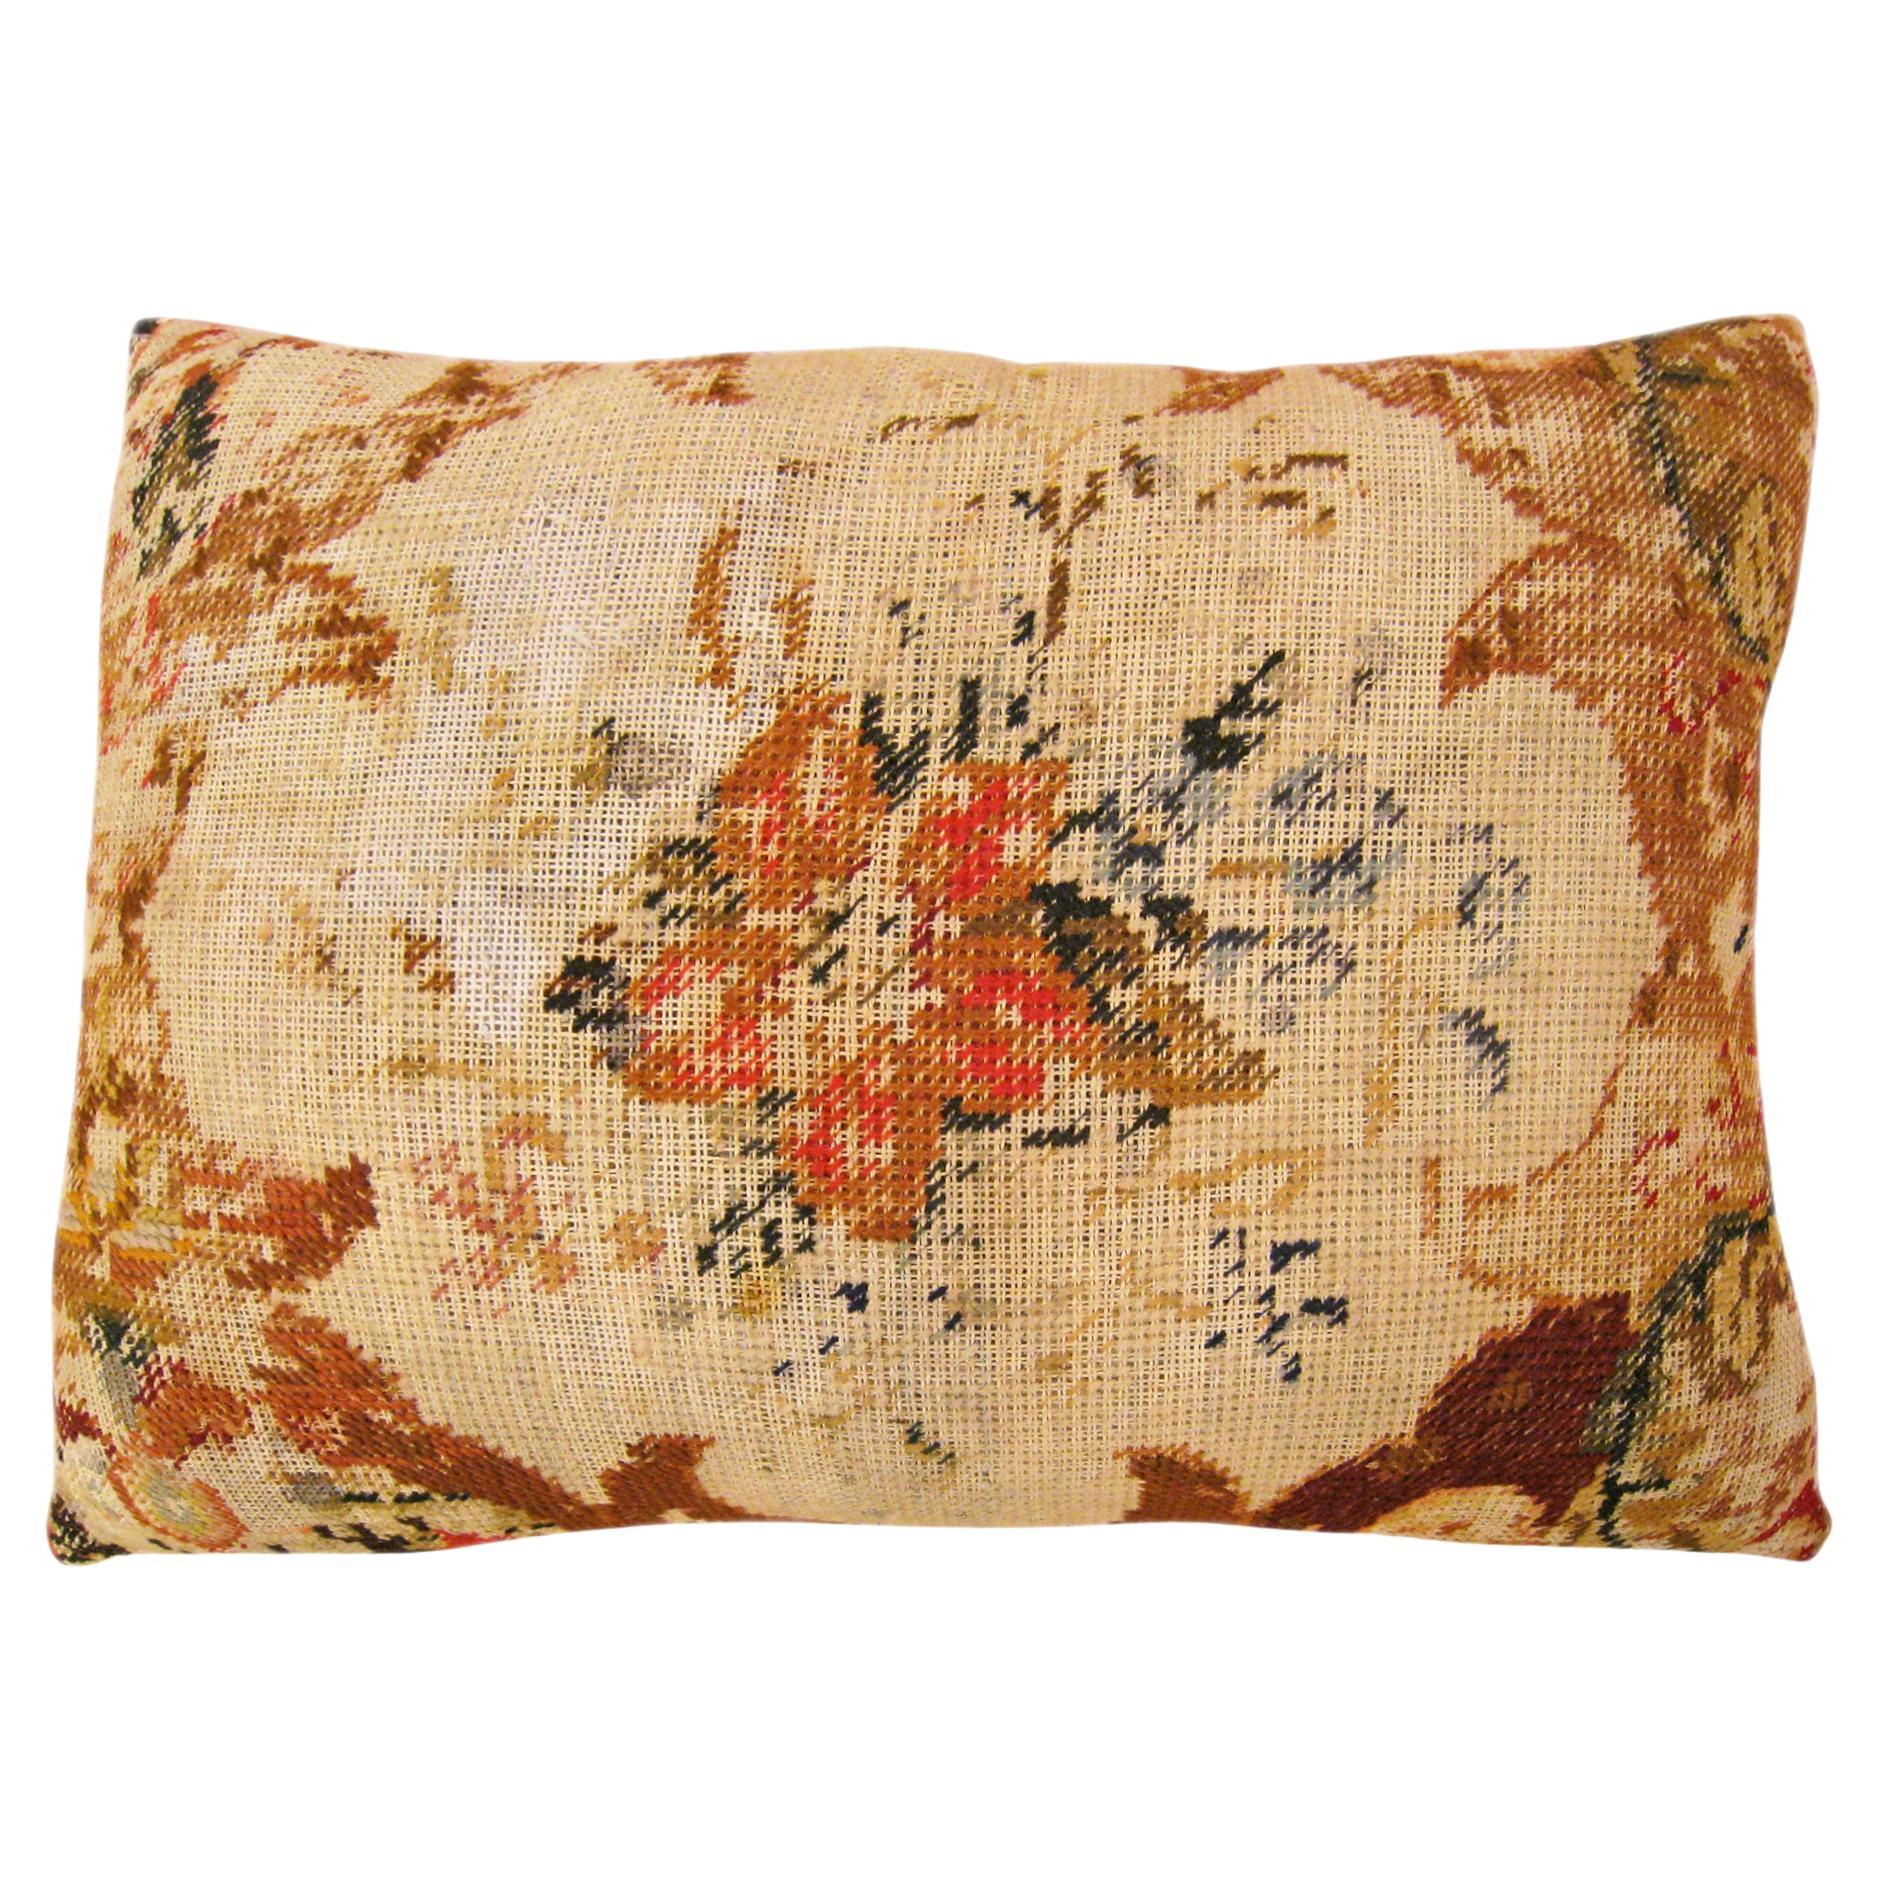  Antique Decorative English Needlepoint Rug Pillow with Floral Elements For Sale